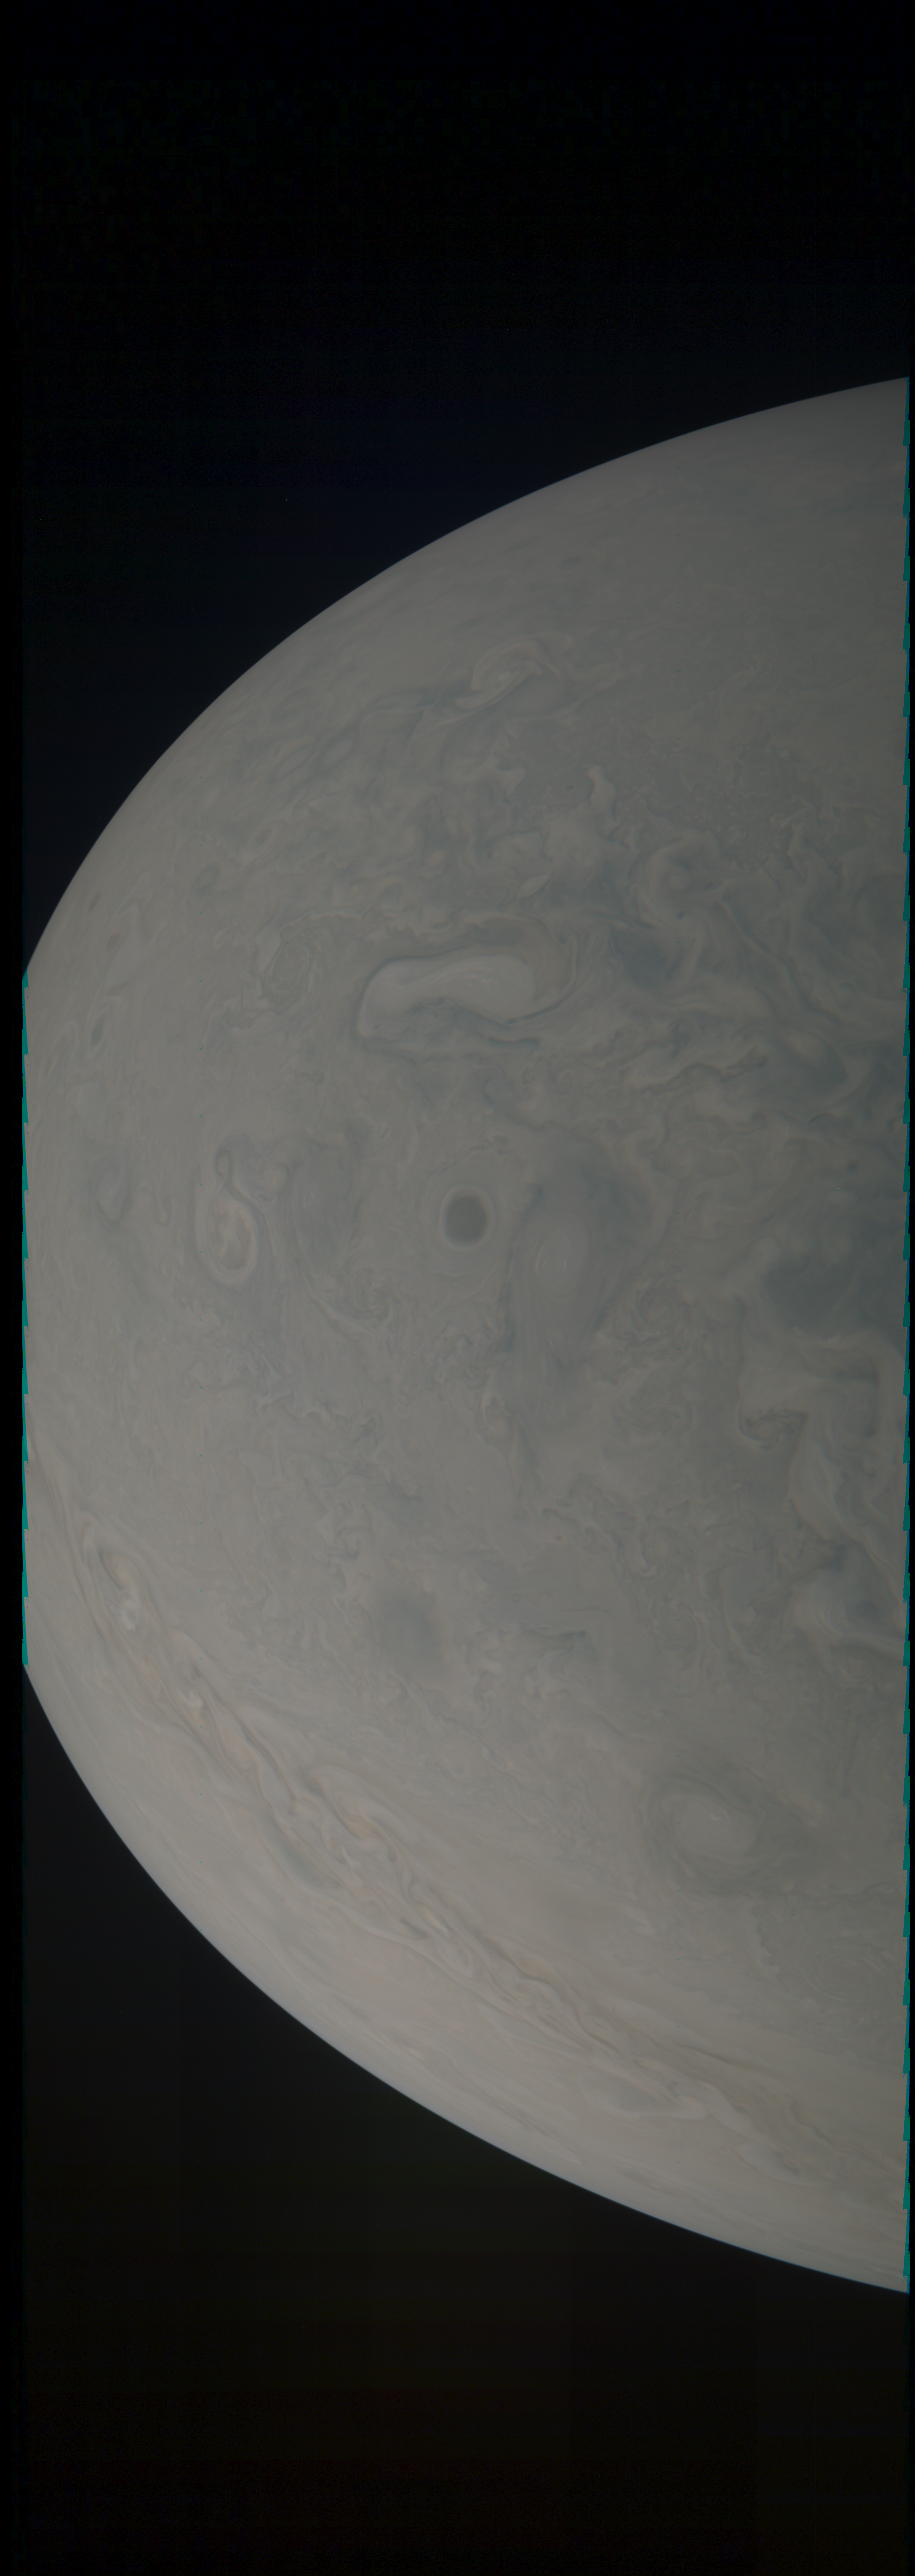 JNCE_2019149_20C00026_V01-raw_proc_hollow_sphere_c_pj_out.BMP_thumbnail_.png